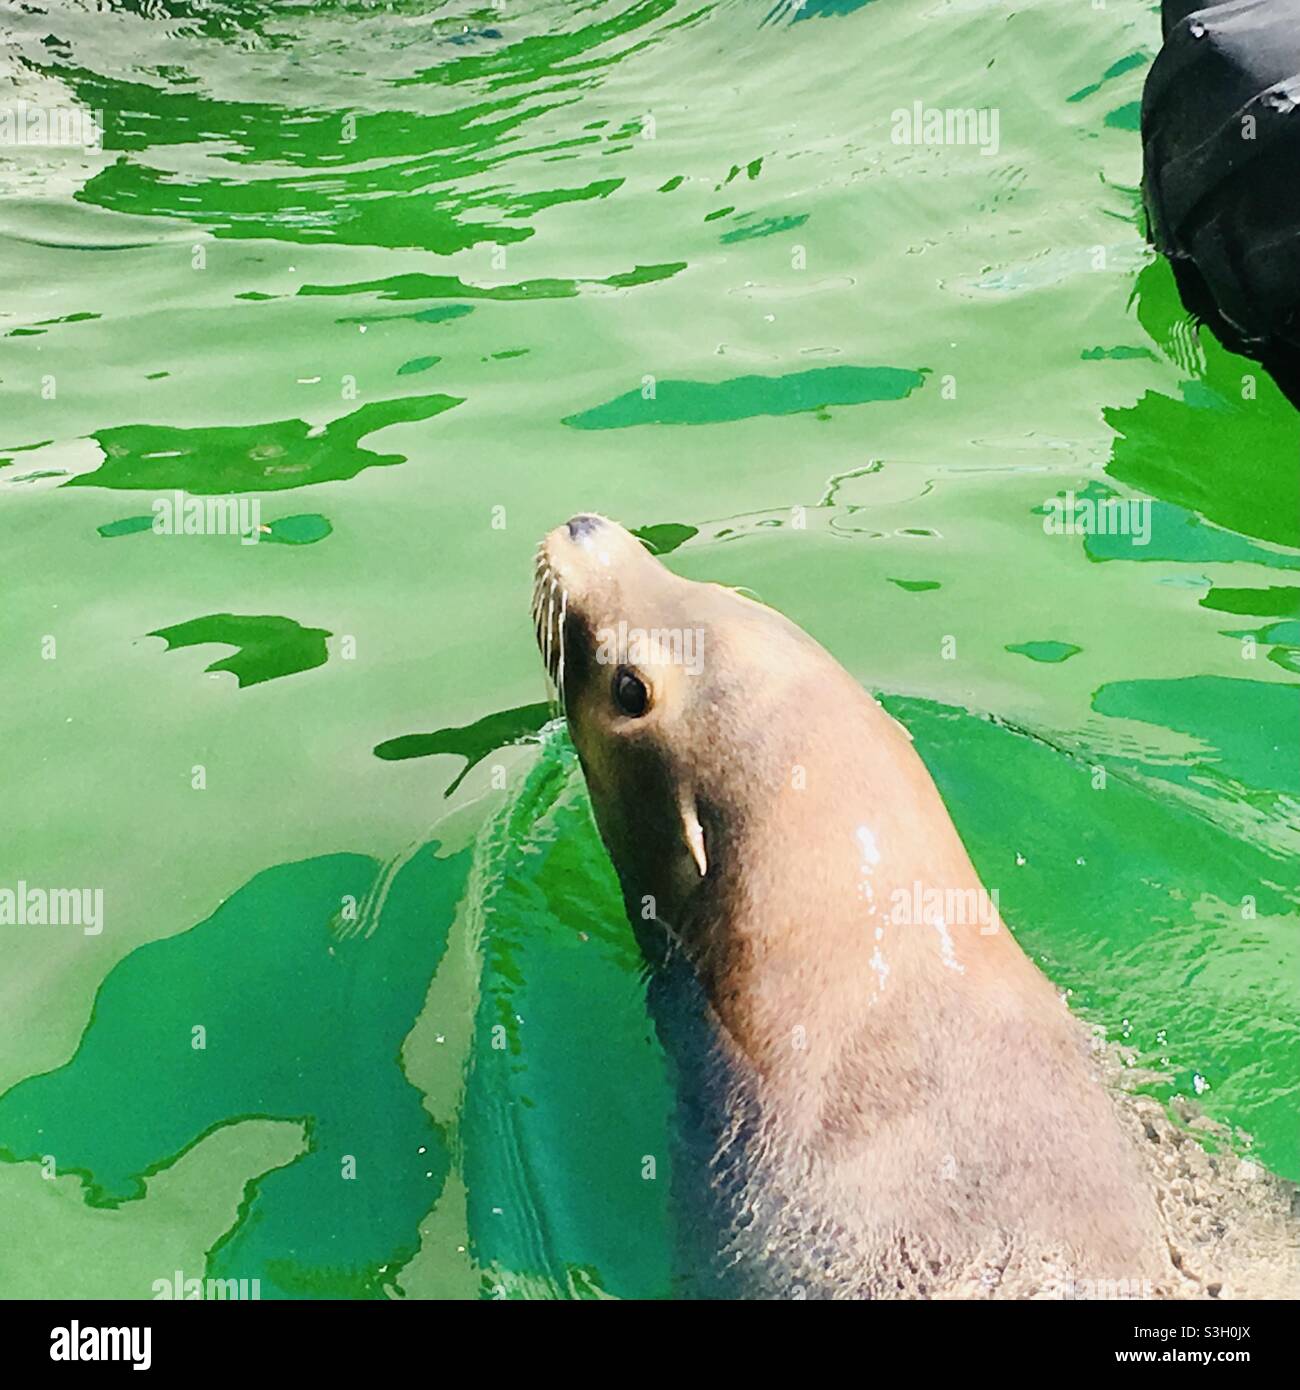 Sea lion looking at the camera in green water Stock Photo